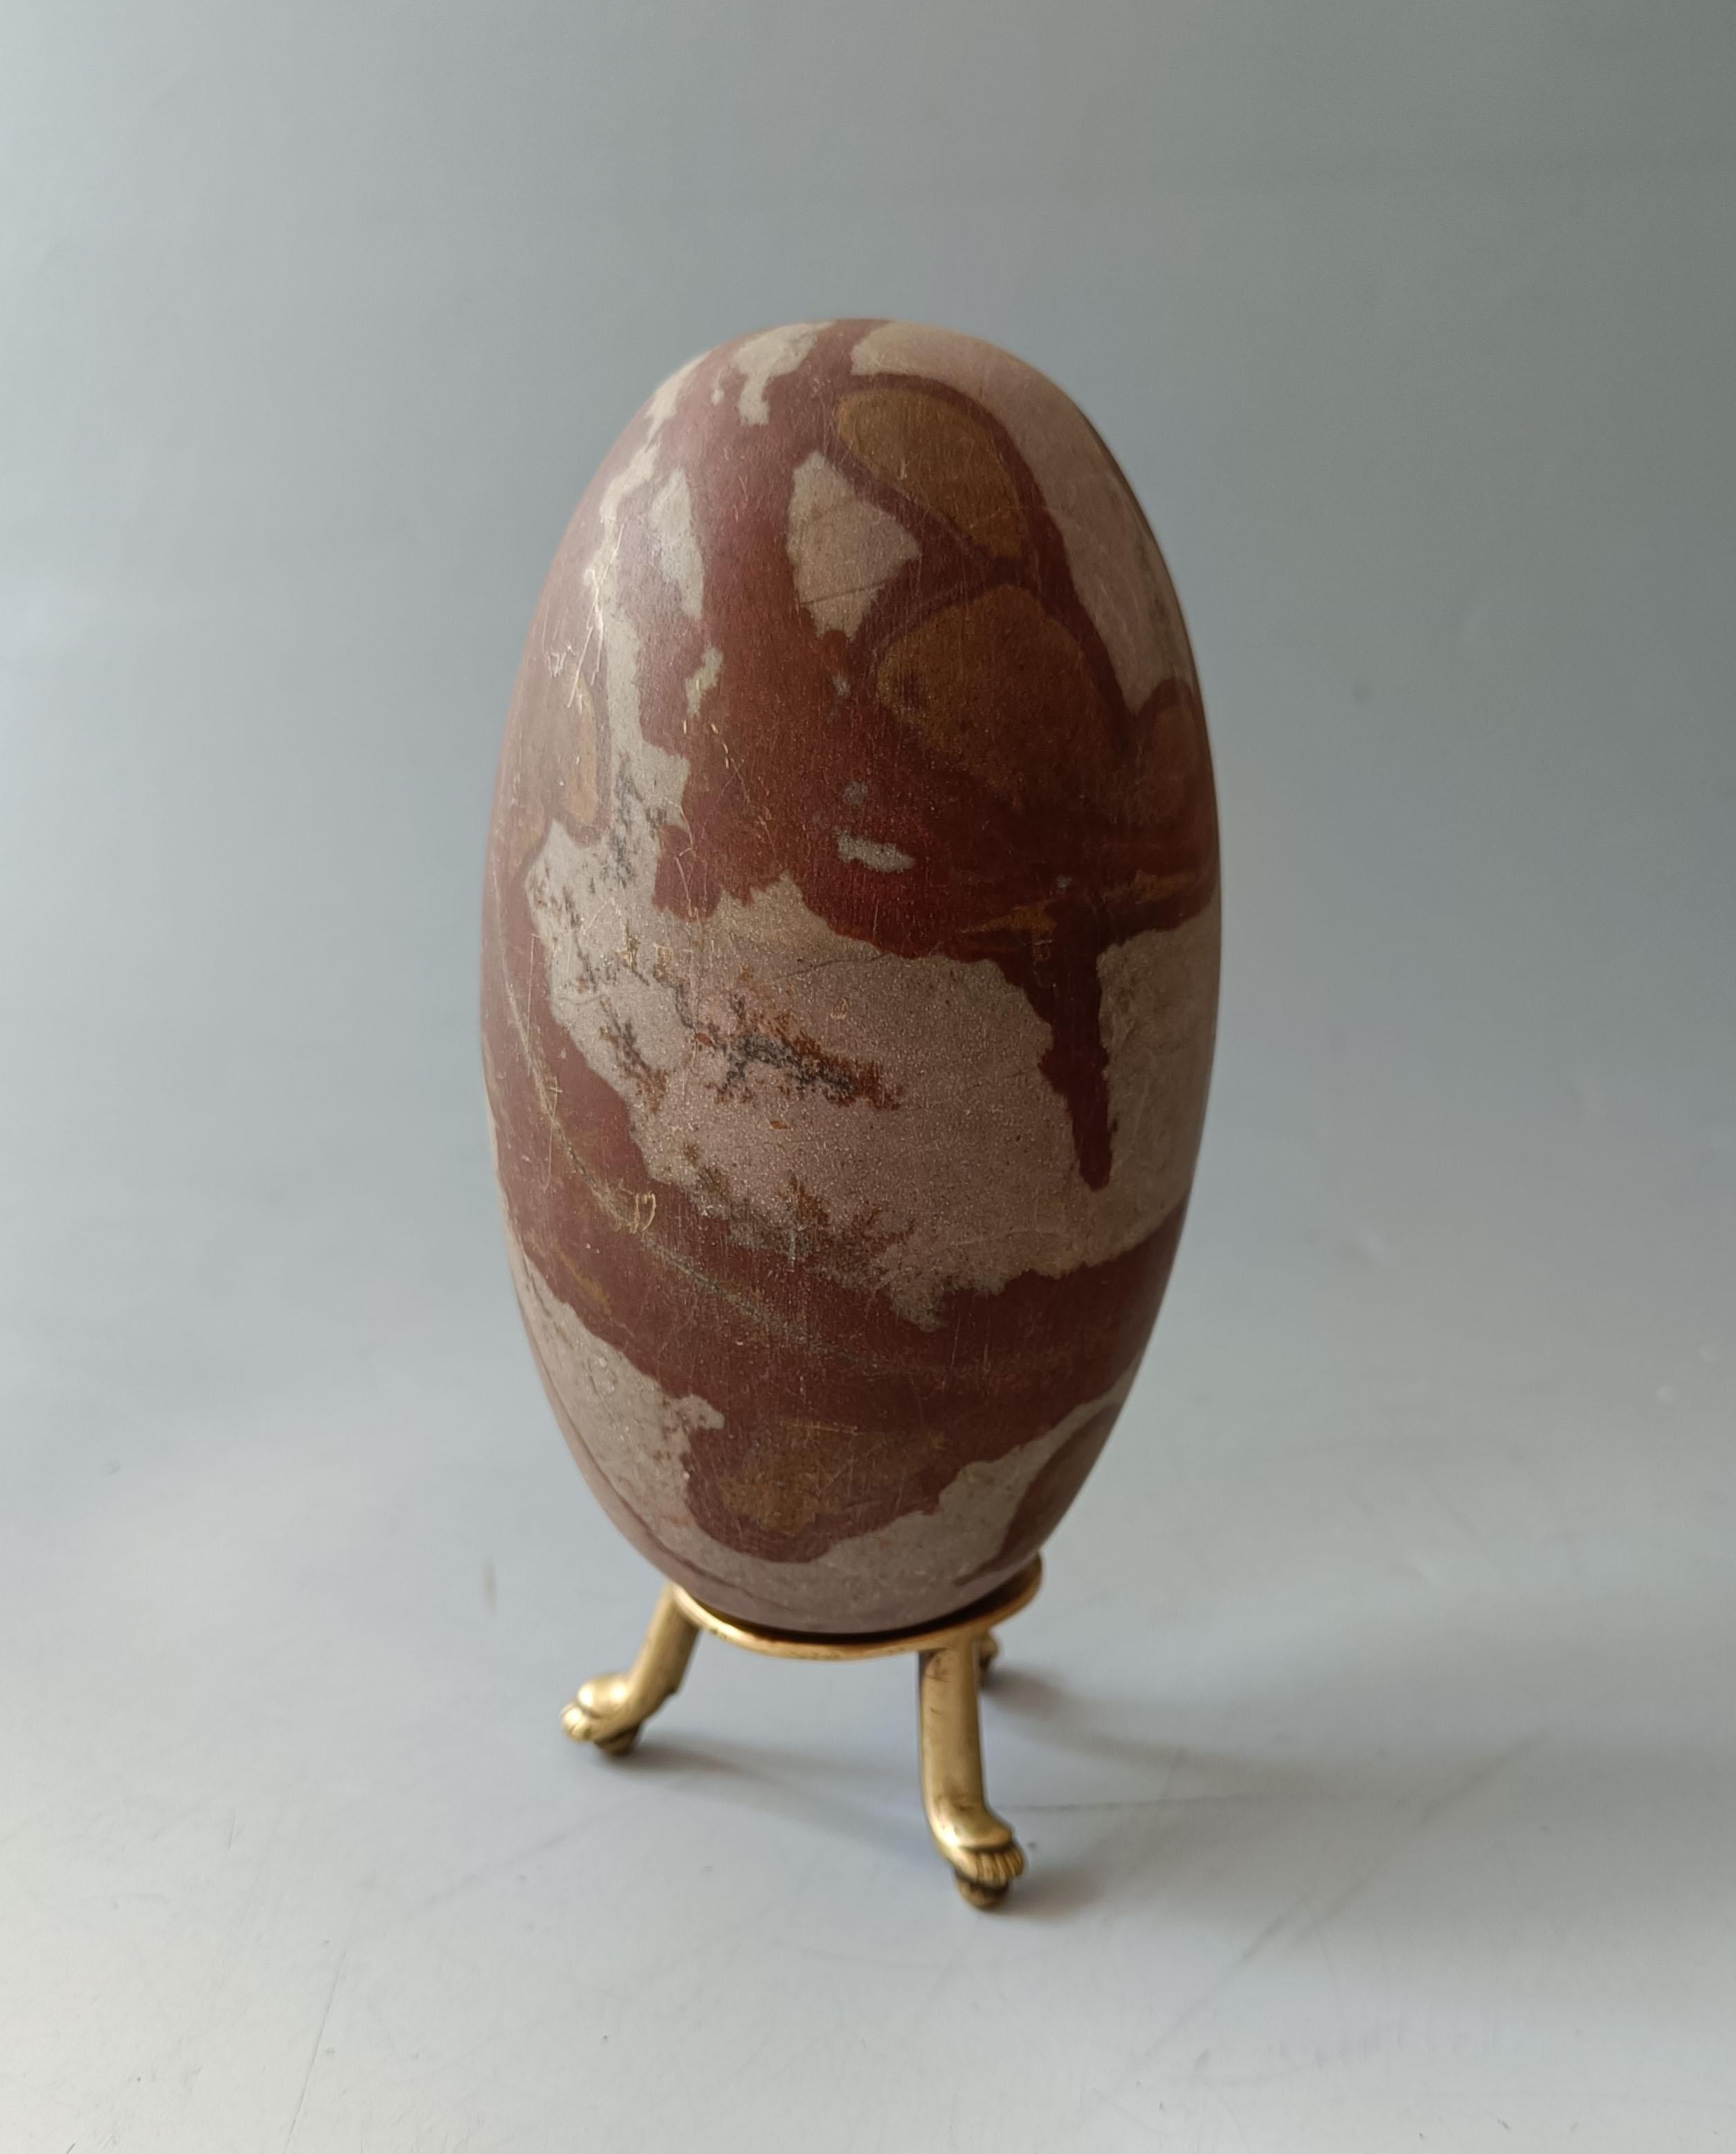  
 
A  multi-coloured stone Shiva Lingam, a  elongated egg shaped stone used for Shaivite worship in Hindu rituals These heavy stones are sacred and come from the Narmada River in India and a collected and polished for use in temple rituals. They